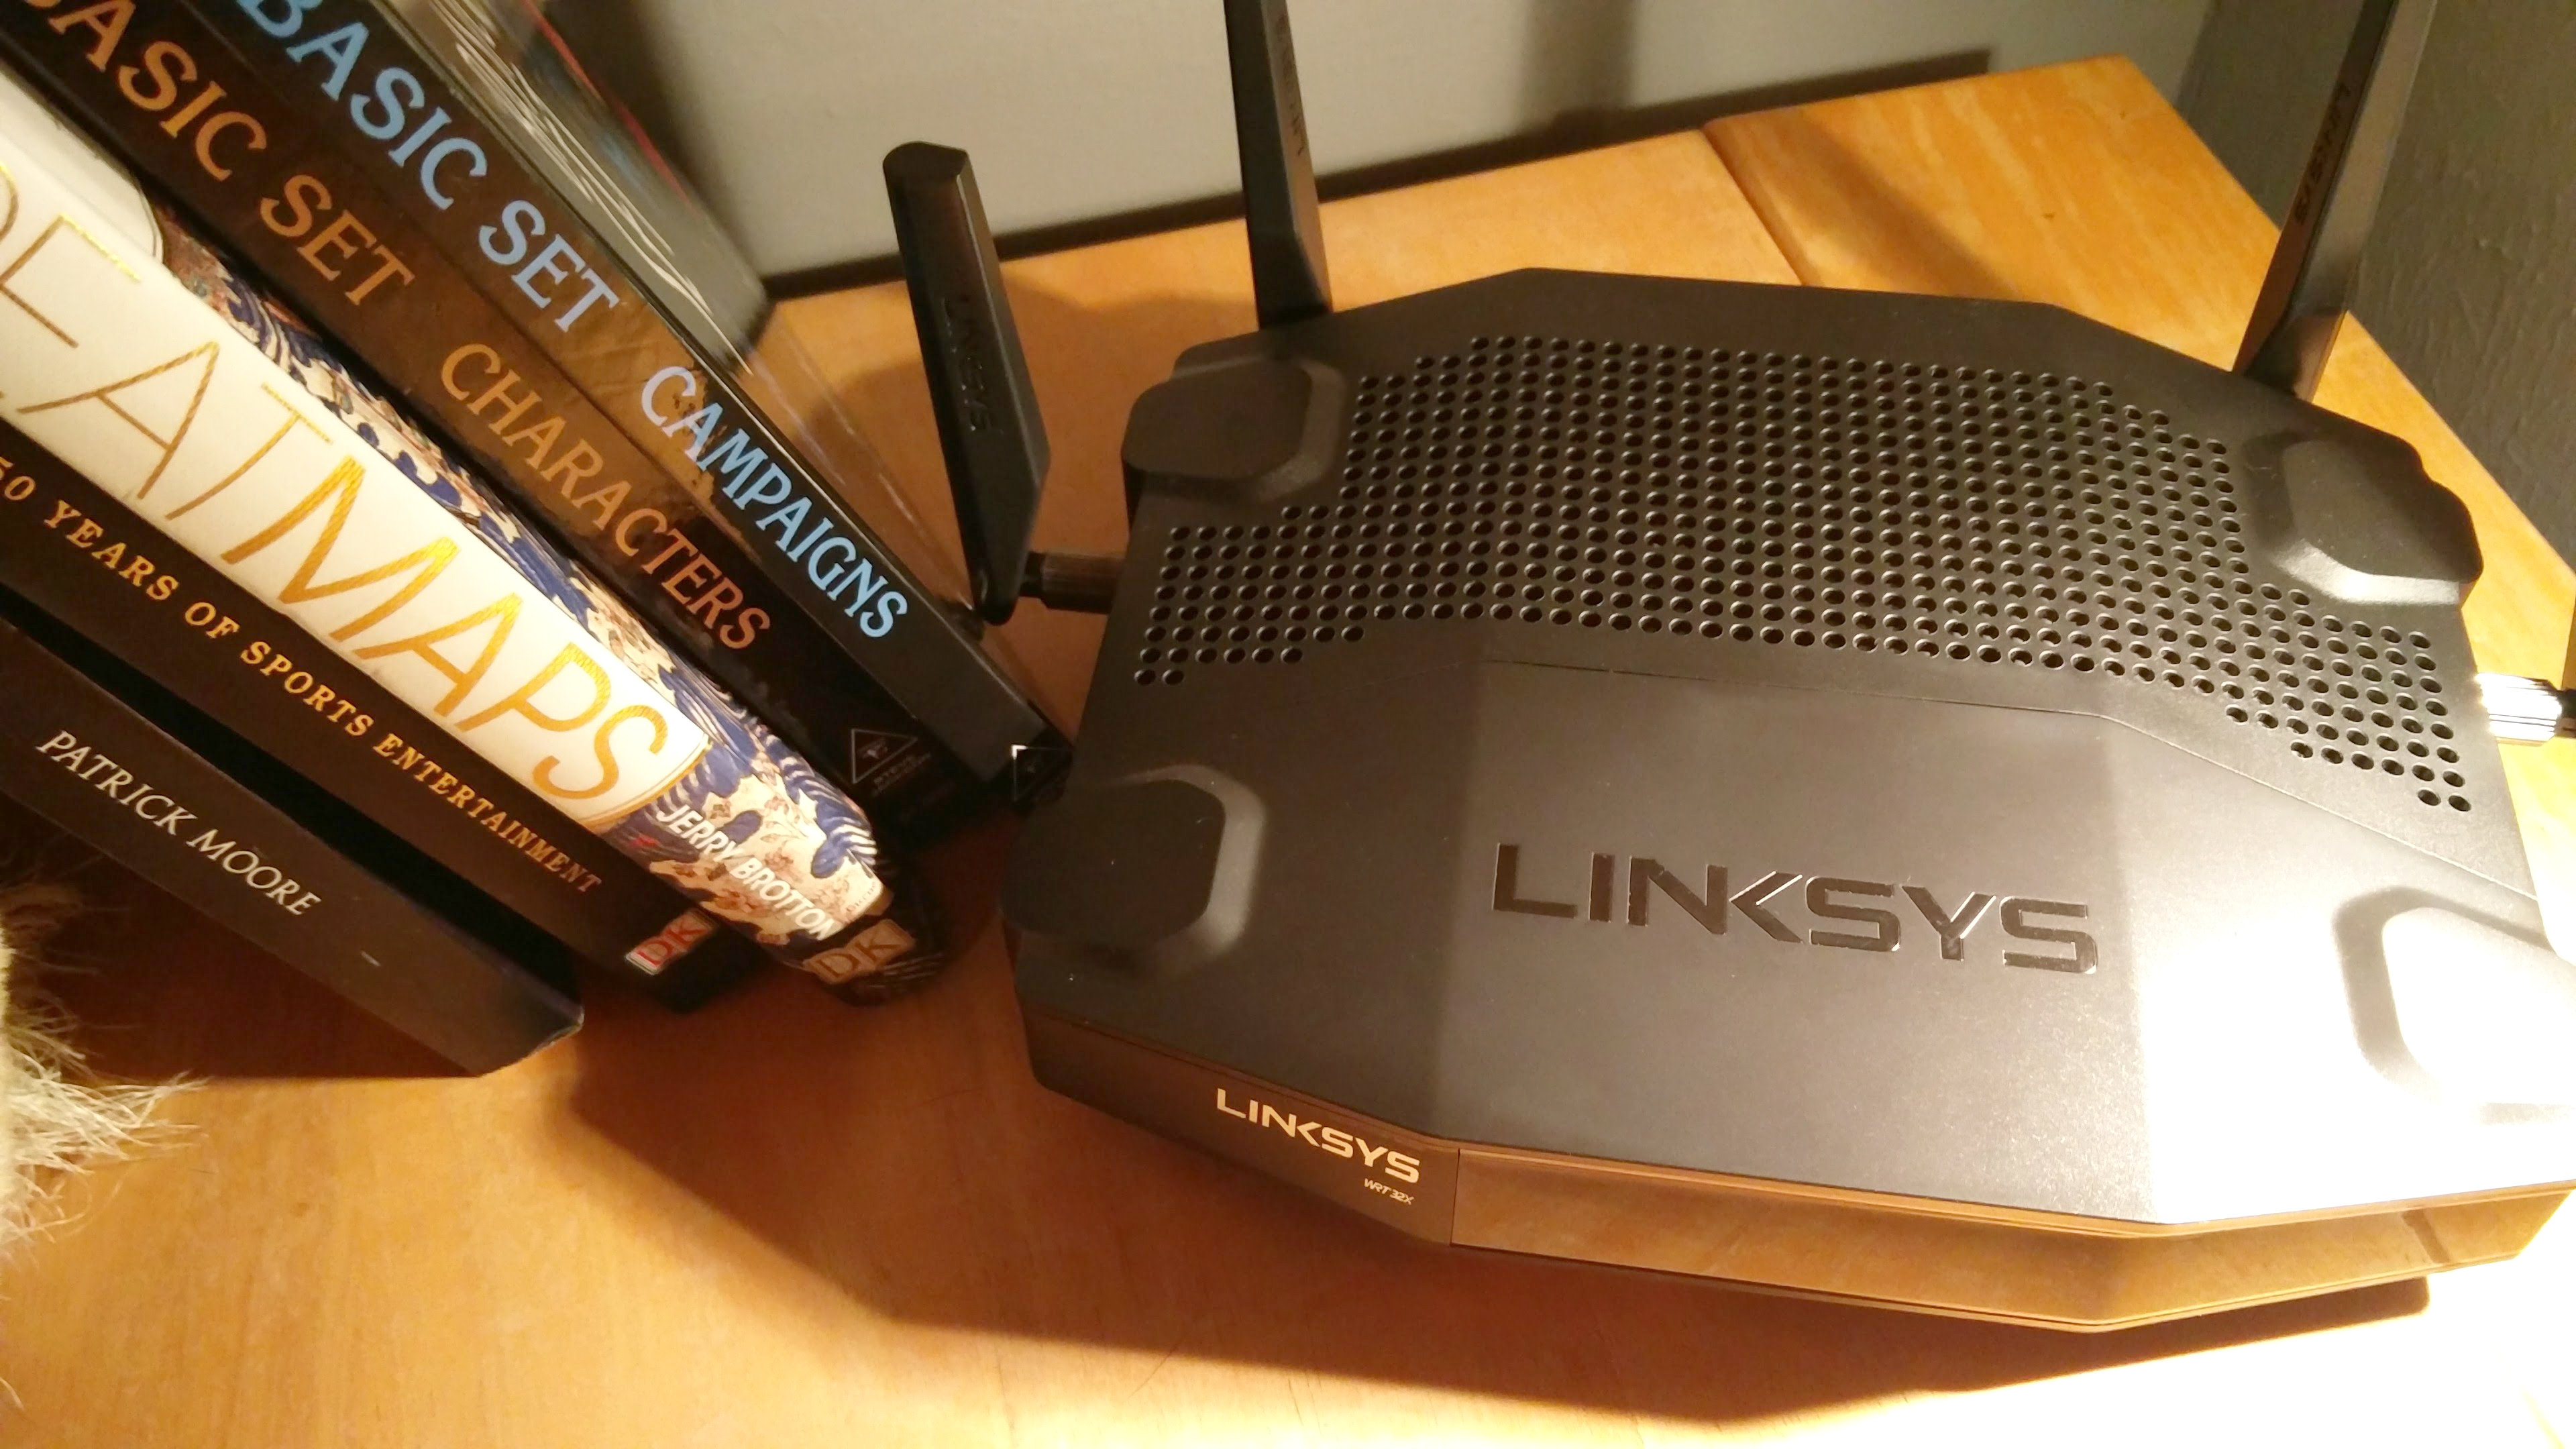 linksys vpn router networking